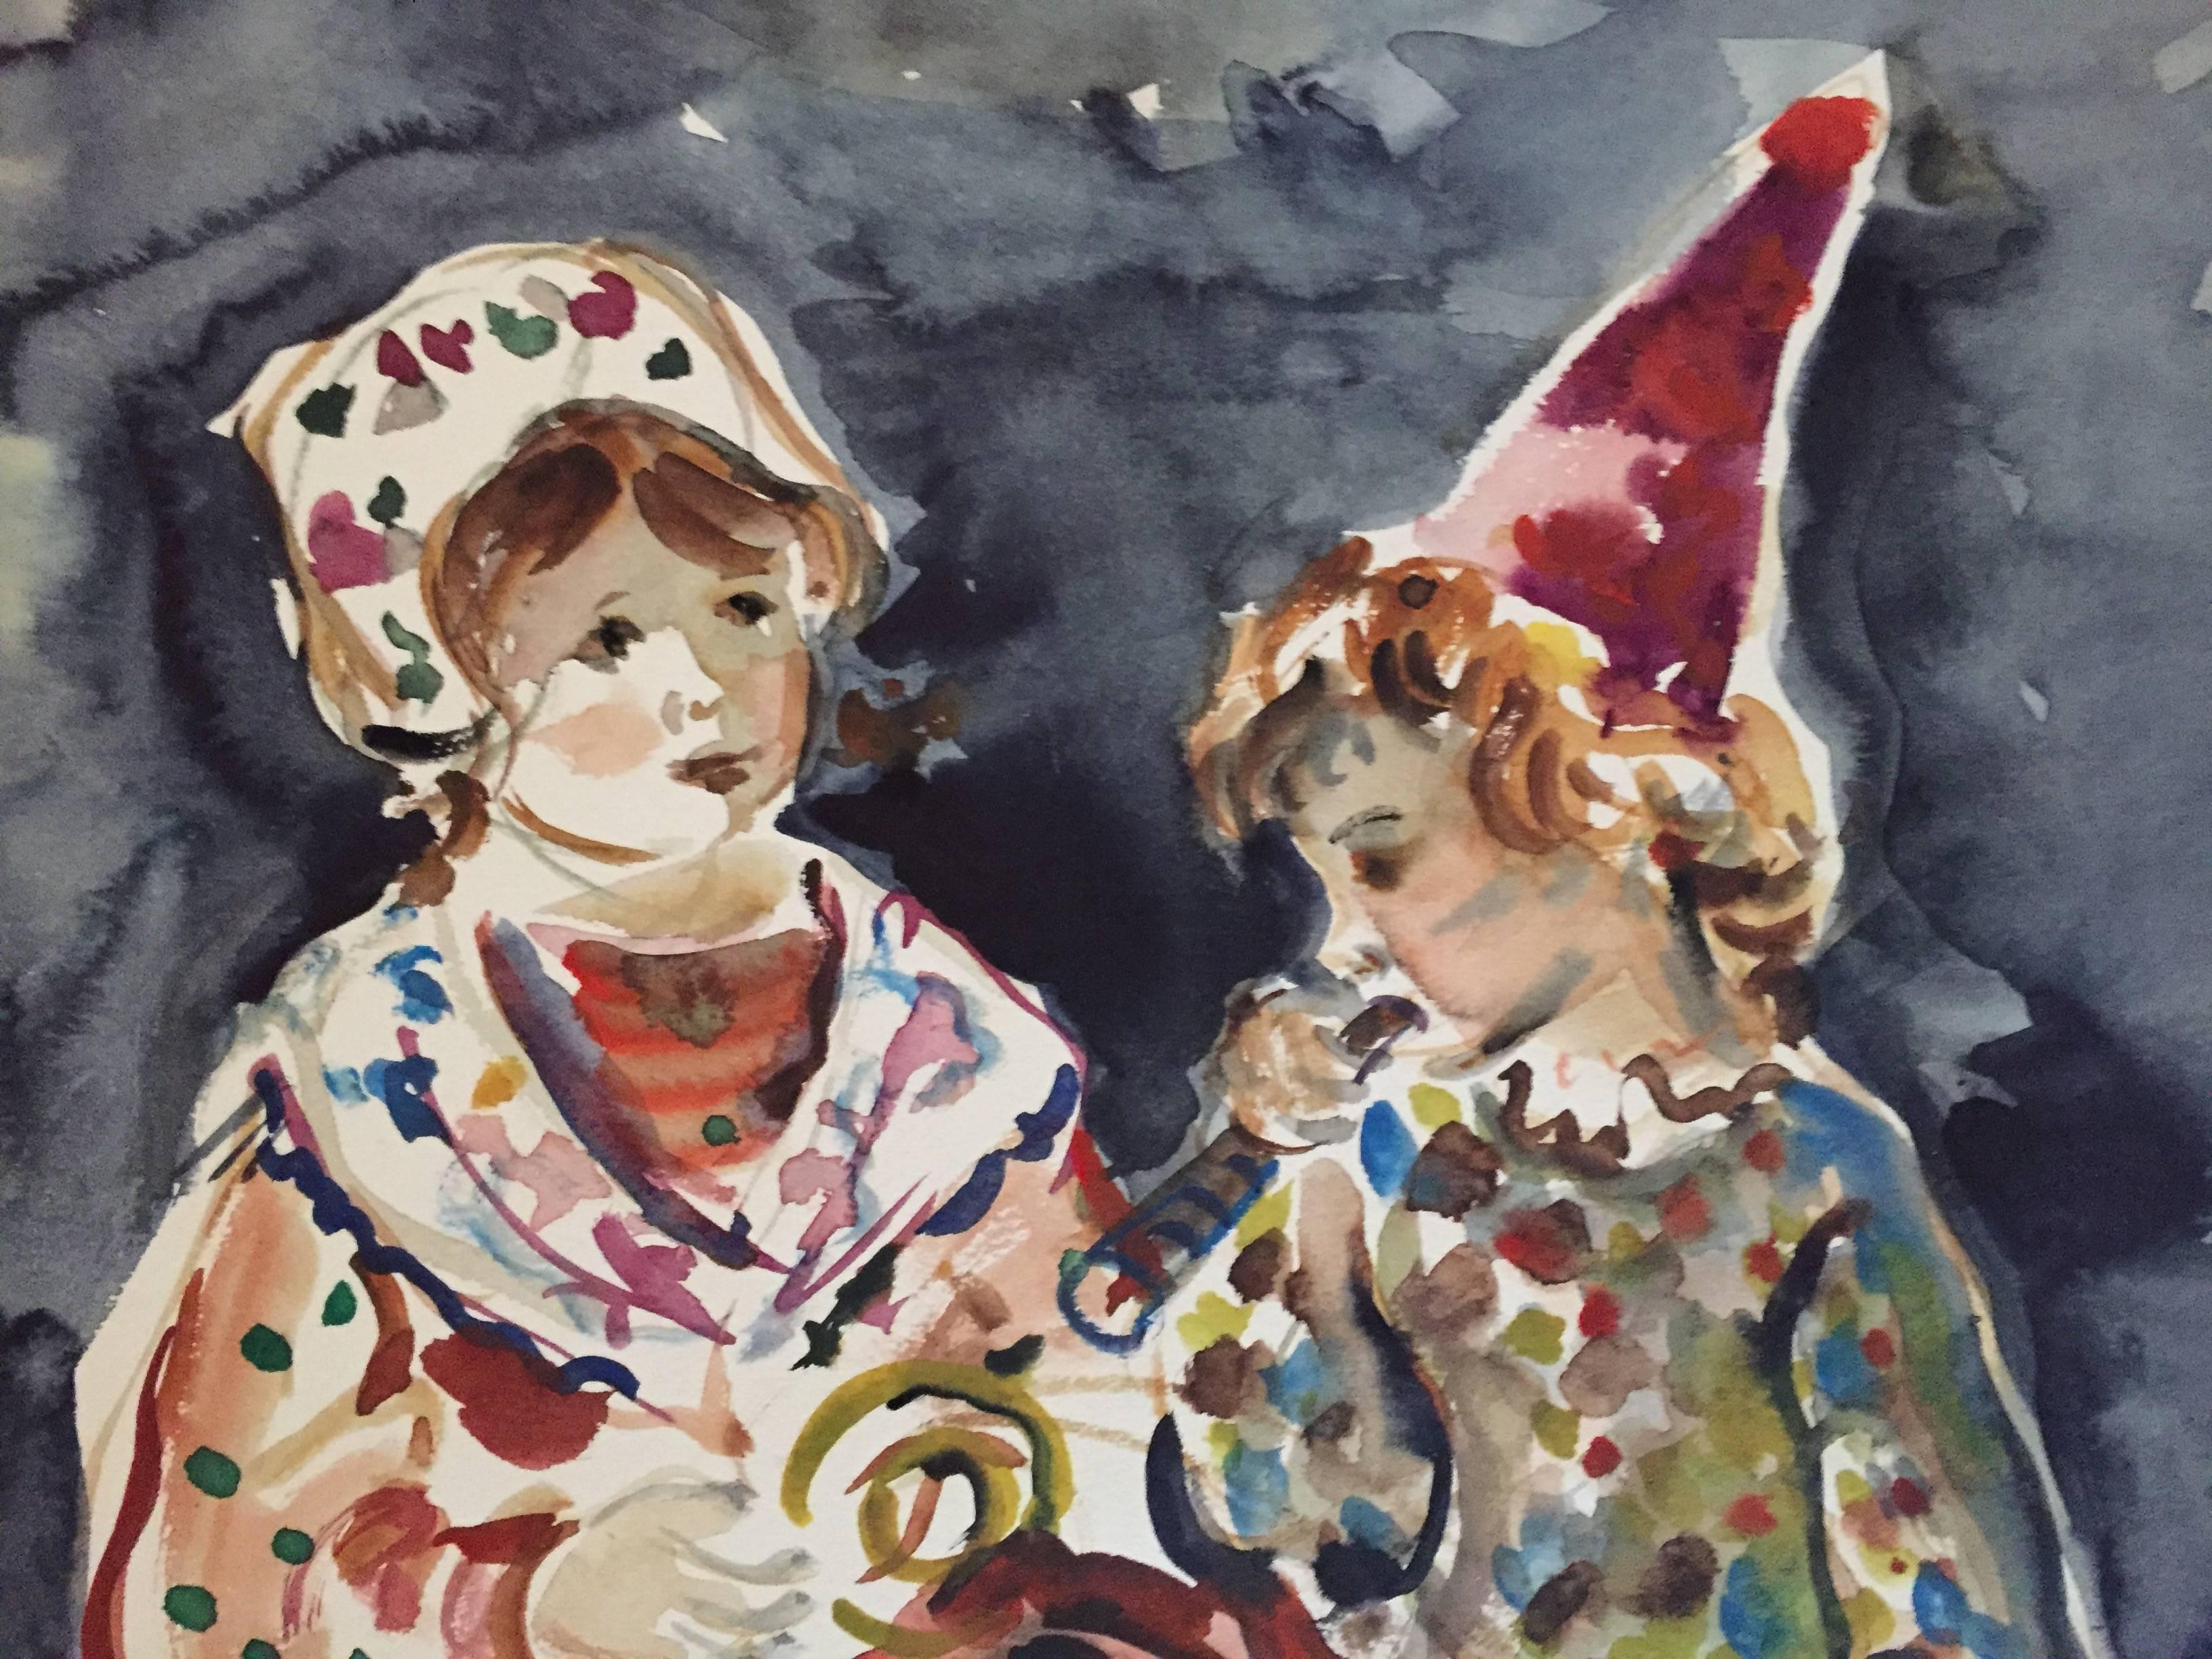 Children's Birthday Costume Party - Art by Katherine Librowicz